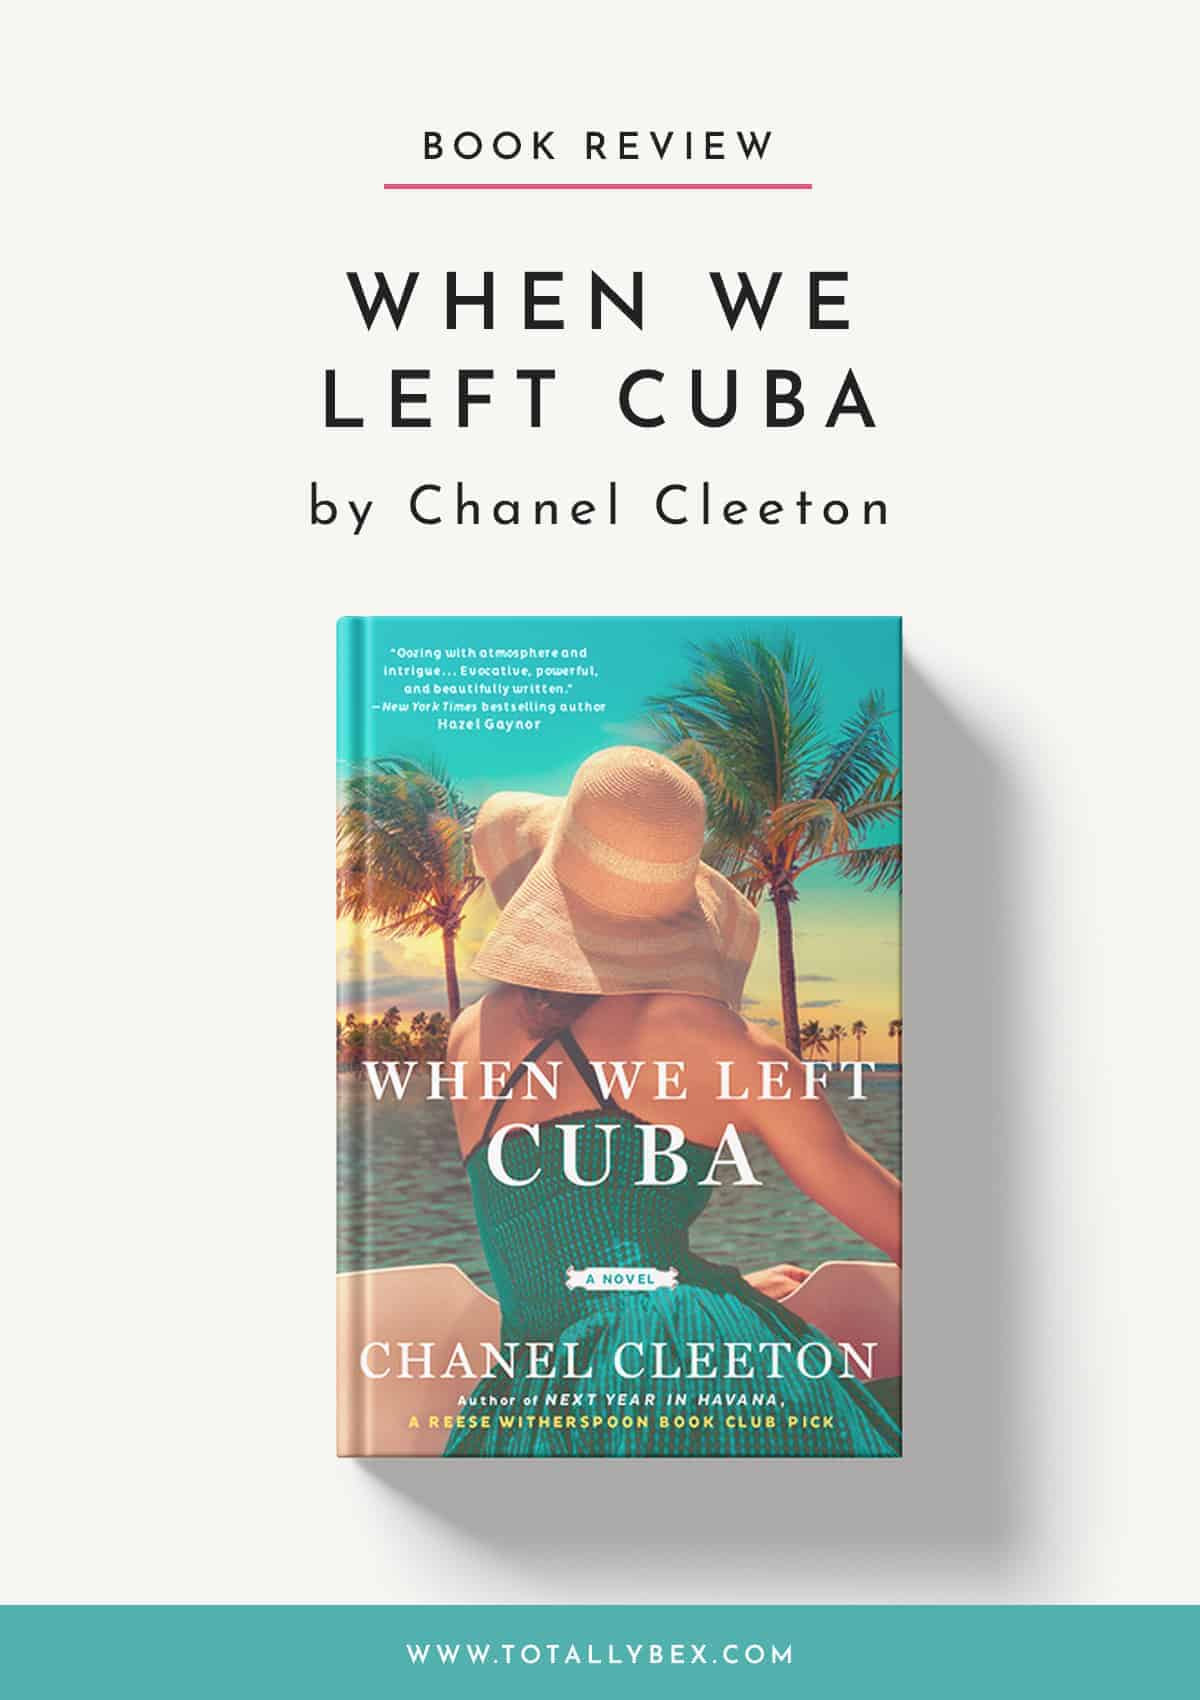 When We Left Cuba by Chanel Cleeton - Glamorous and Intriguing 60s Romance  | Totally Bex